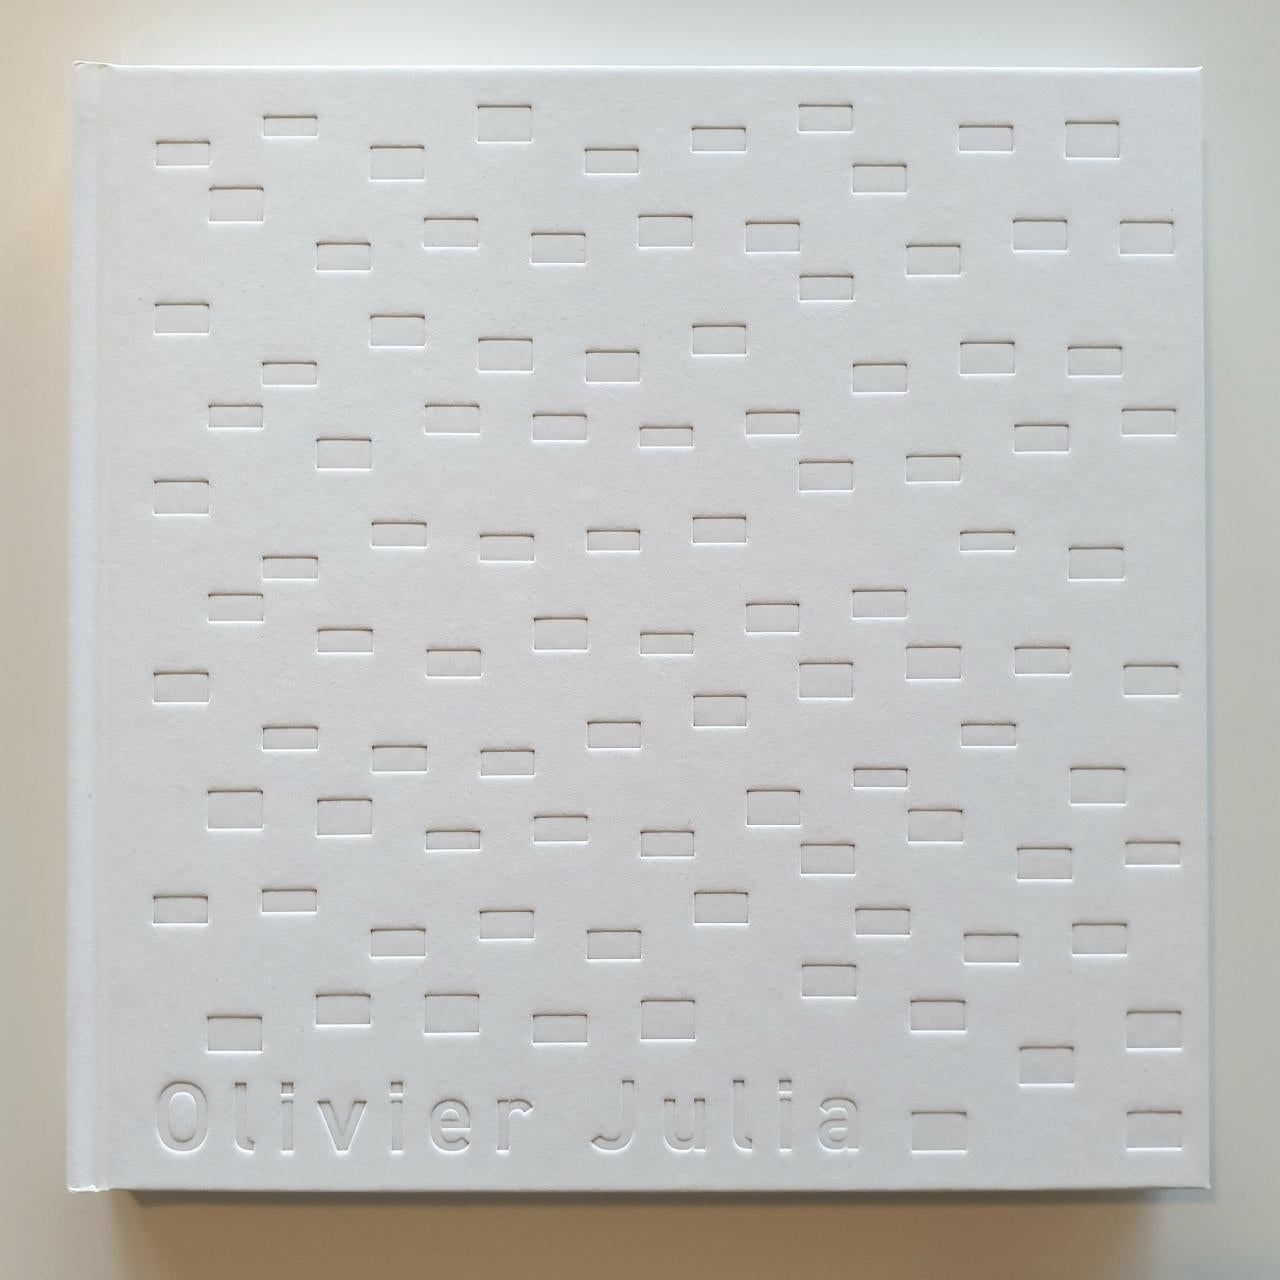 Confusion ritmique I no. 8/10 is one of a series of three different medium size contemporary modern sculpture painting relief by French-Dutch artist Olivier Julia. The relief is made from wood and finished with a mixture of anthracite grey and